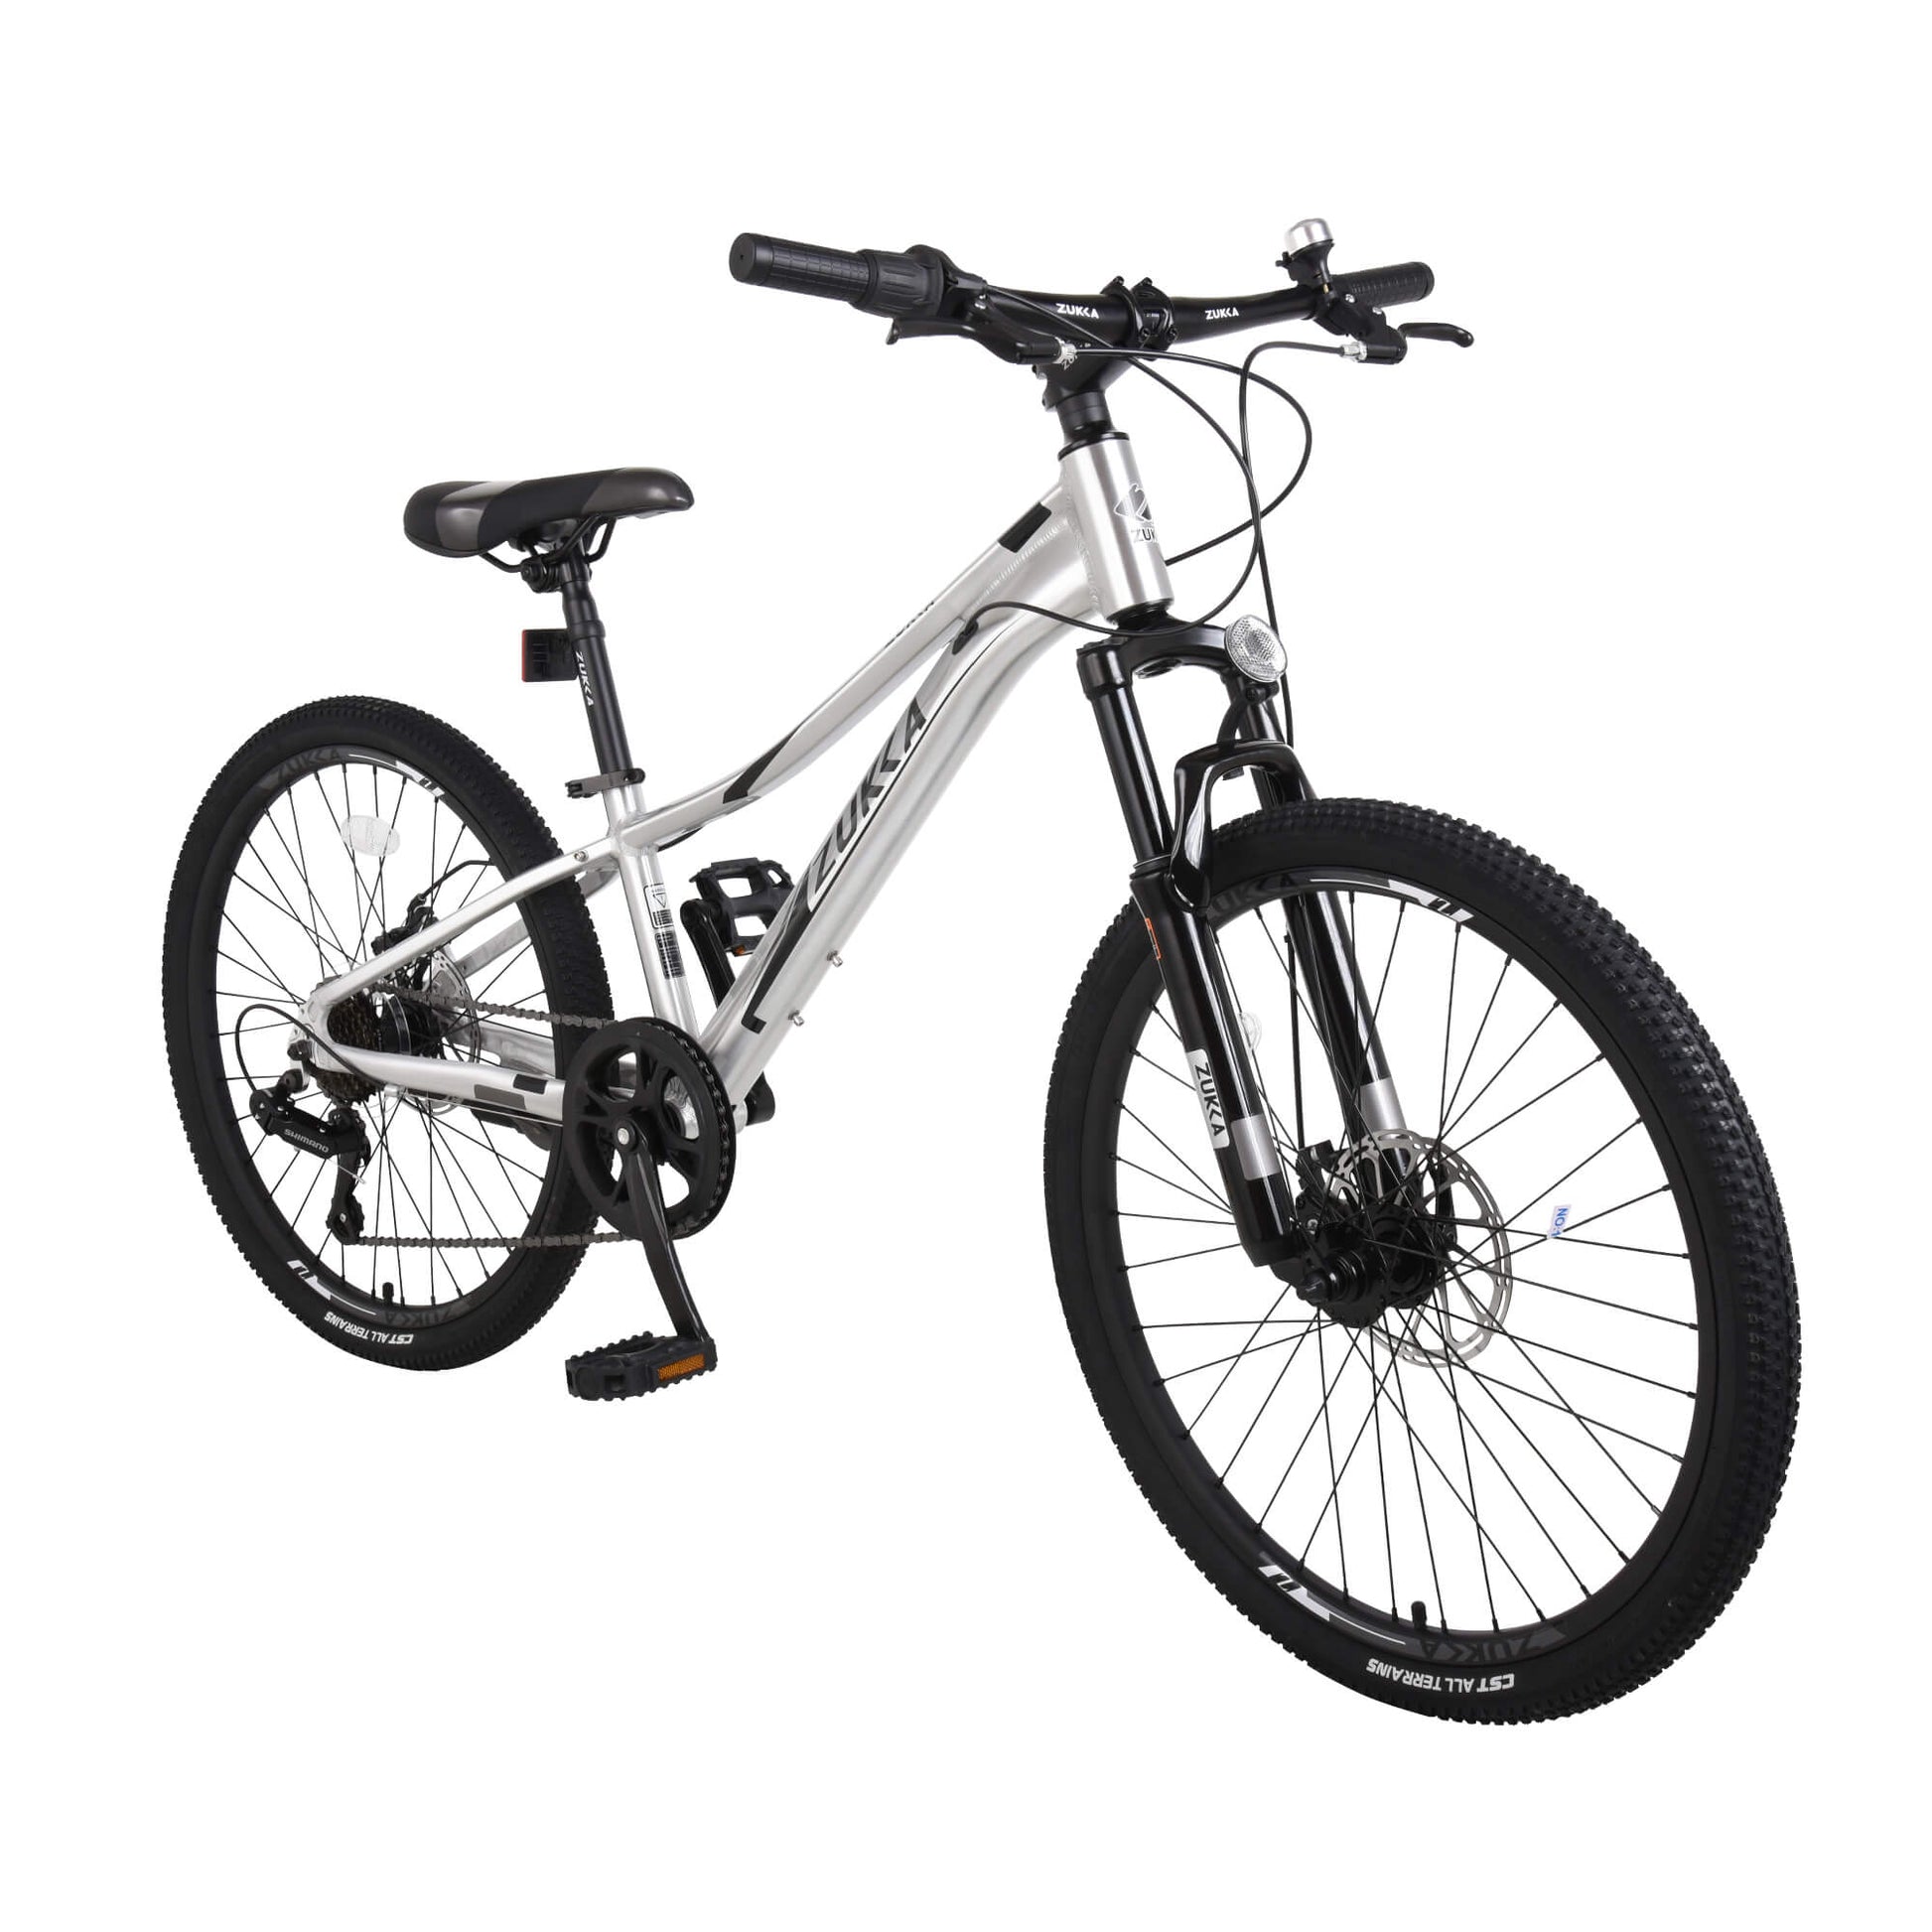 Hycline 24”×2.1" Dynamic Mountain Bike For Youth And Adults - Silver